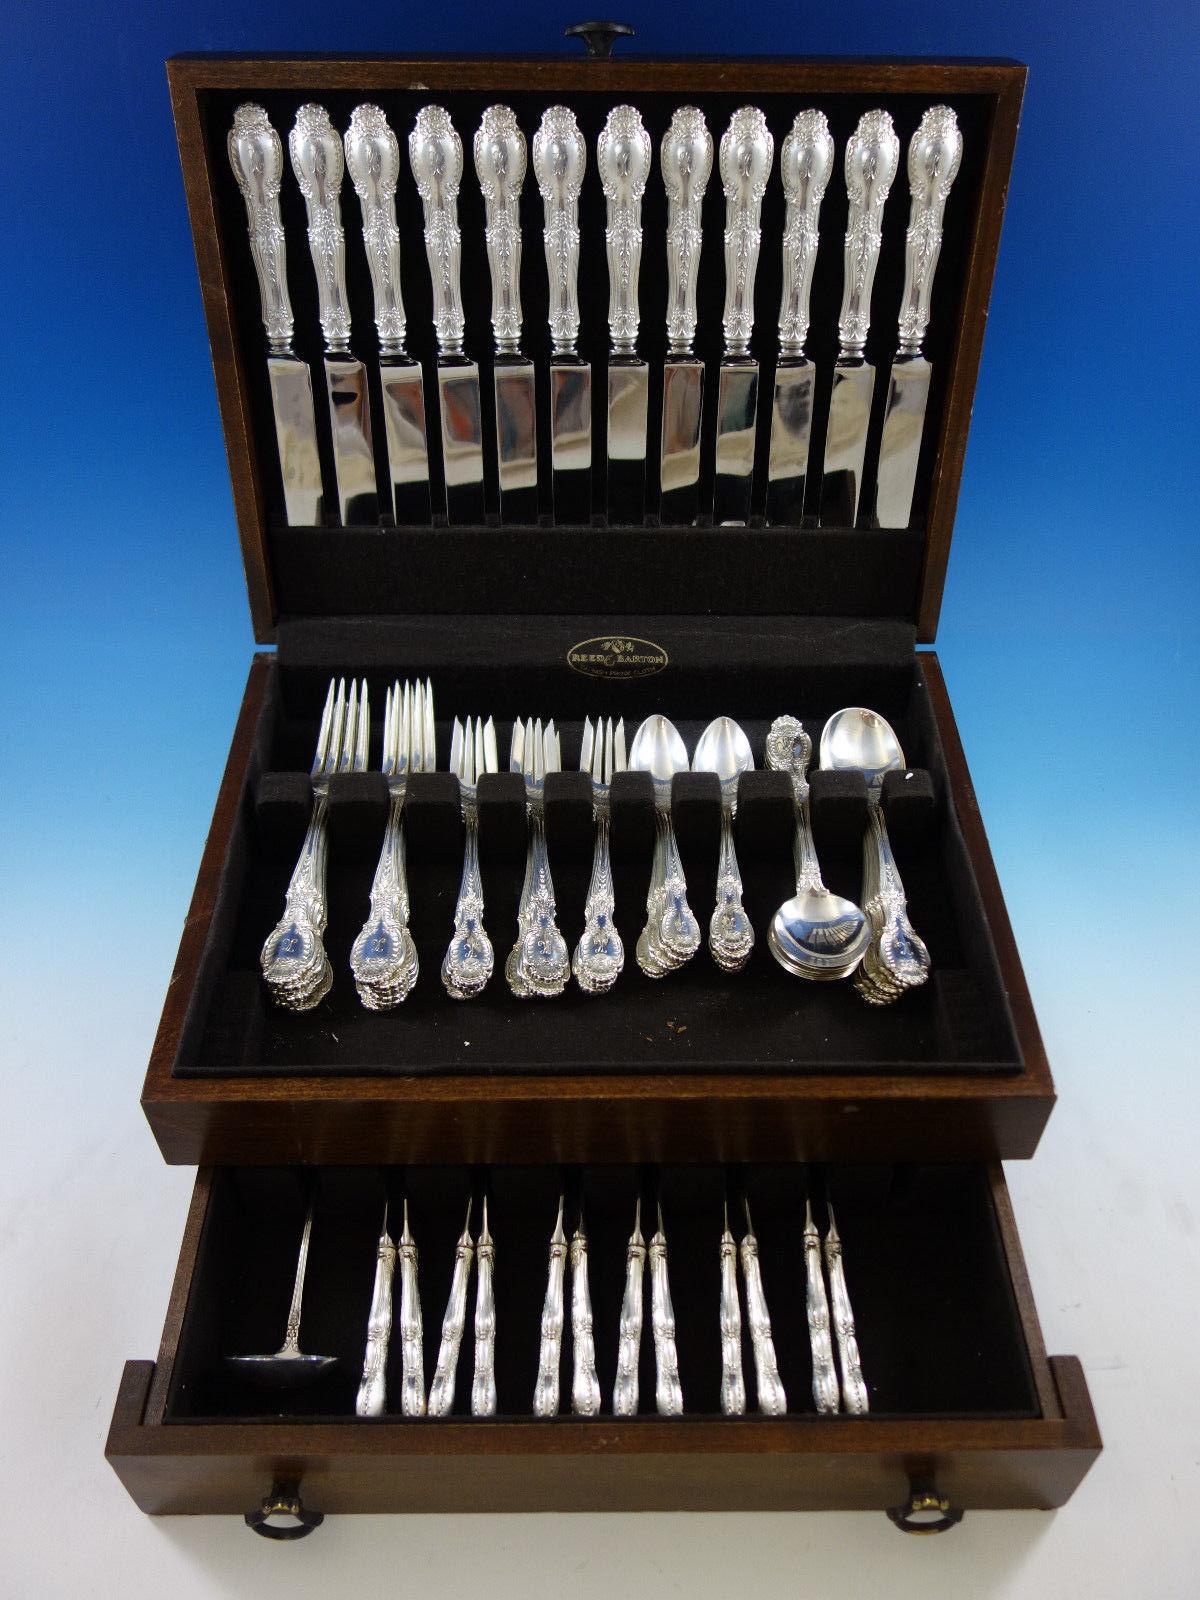 Dinner Size Richelieu by Tiffany & Co. sterling silver Flatware set, 73 pieces. This set includes:

12 Dinner Size Knives, 10 1/4